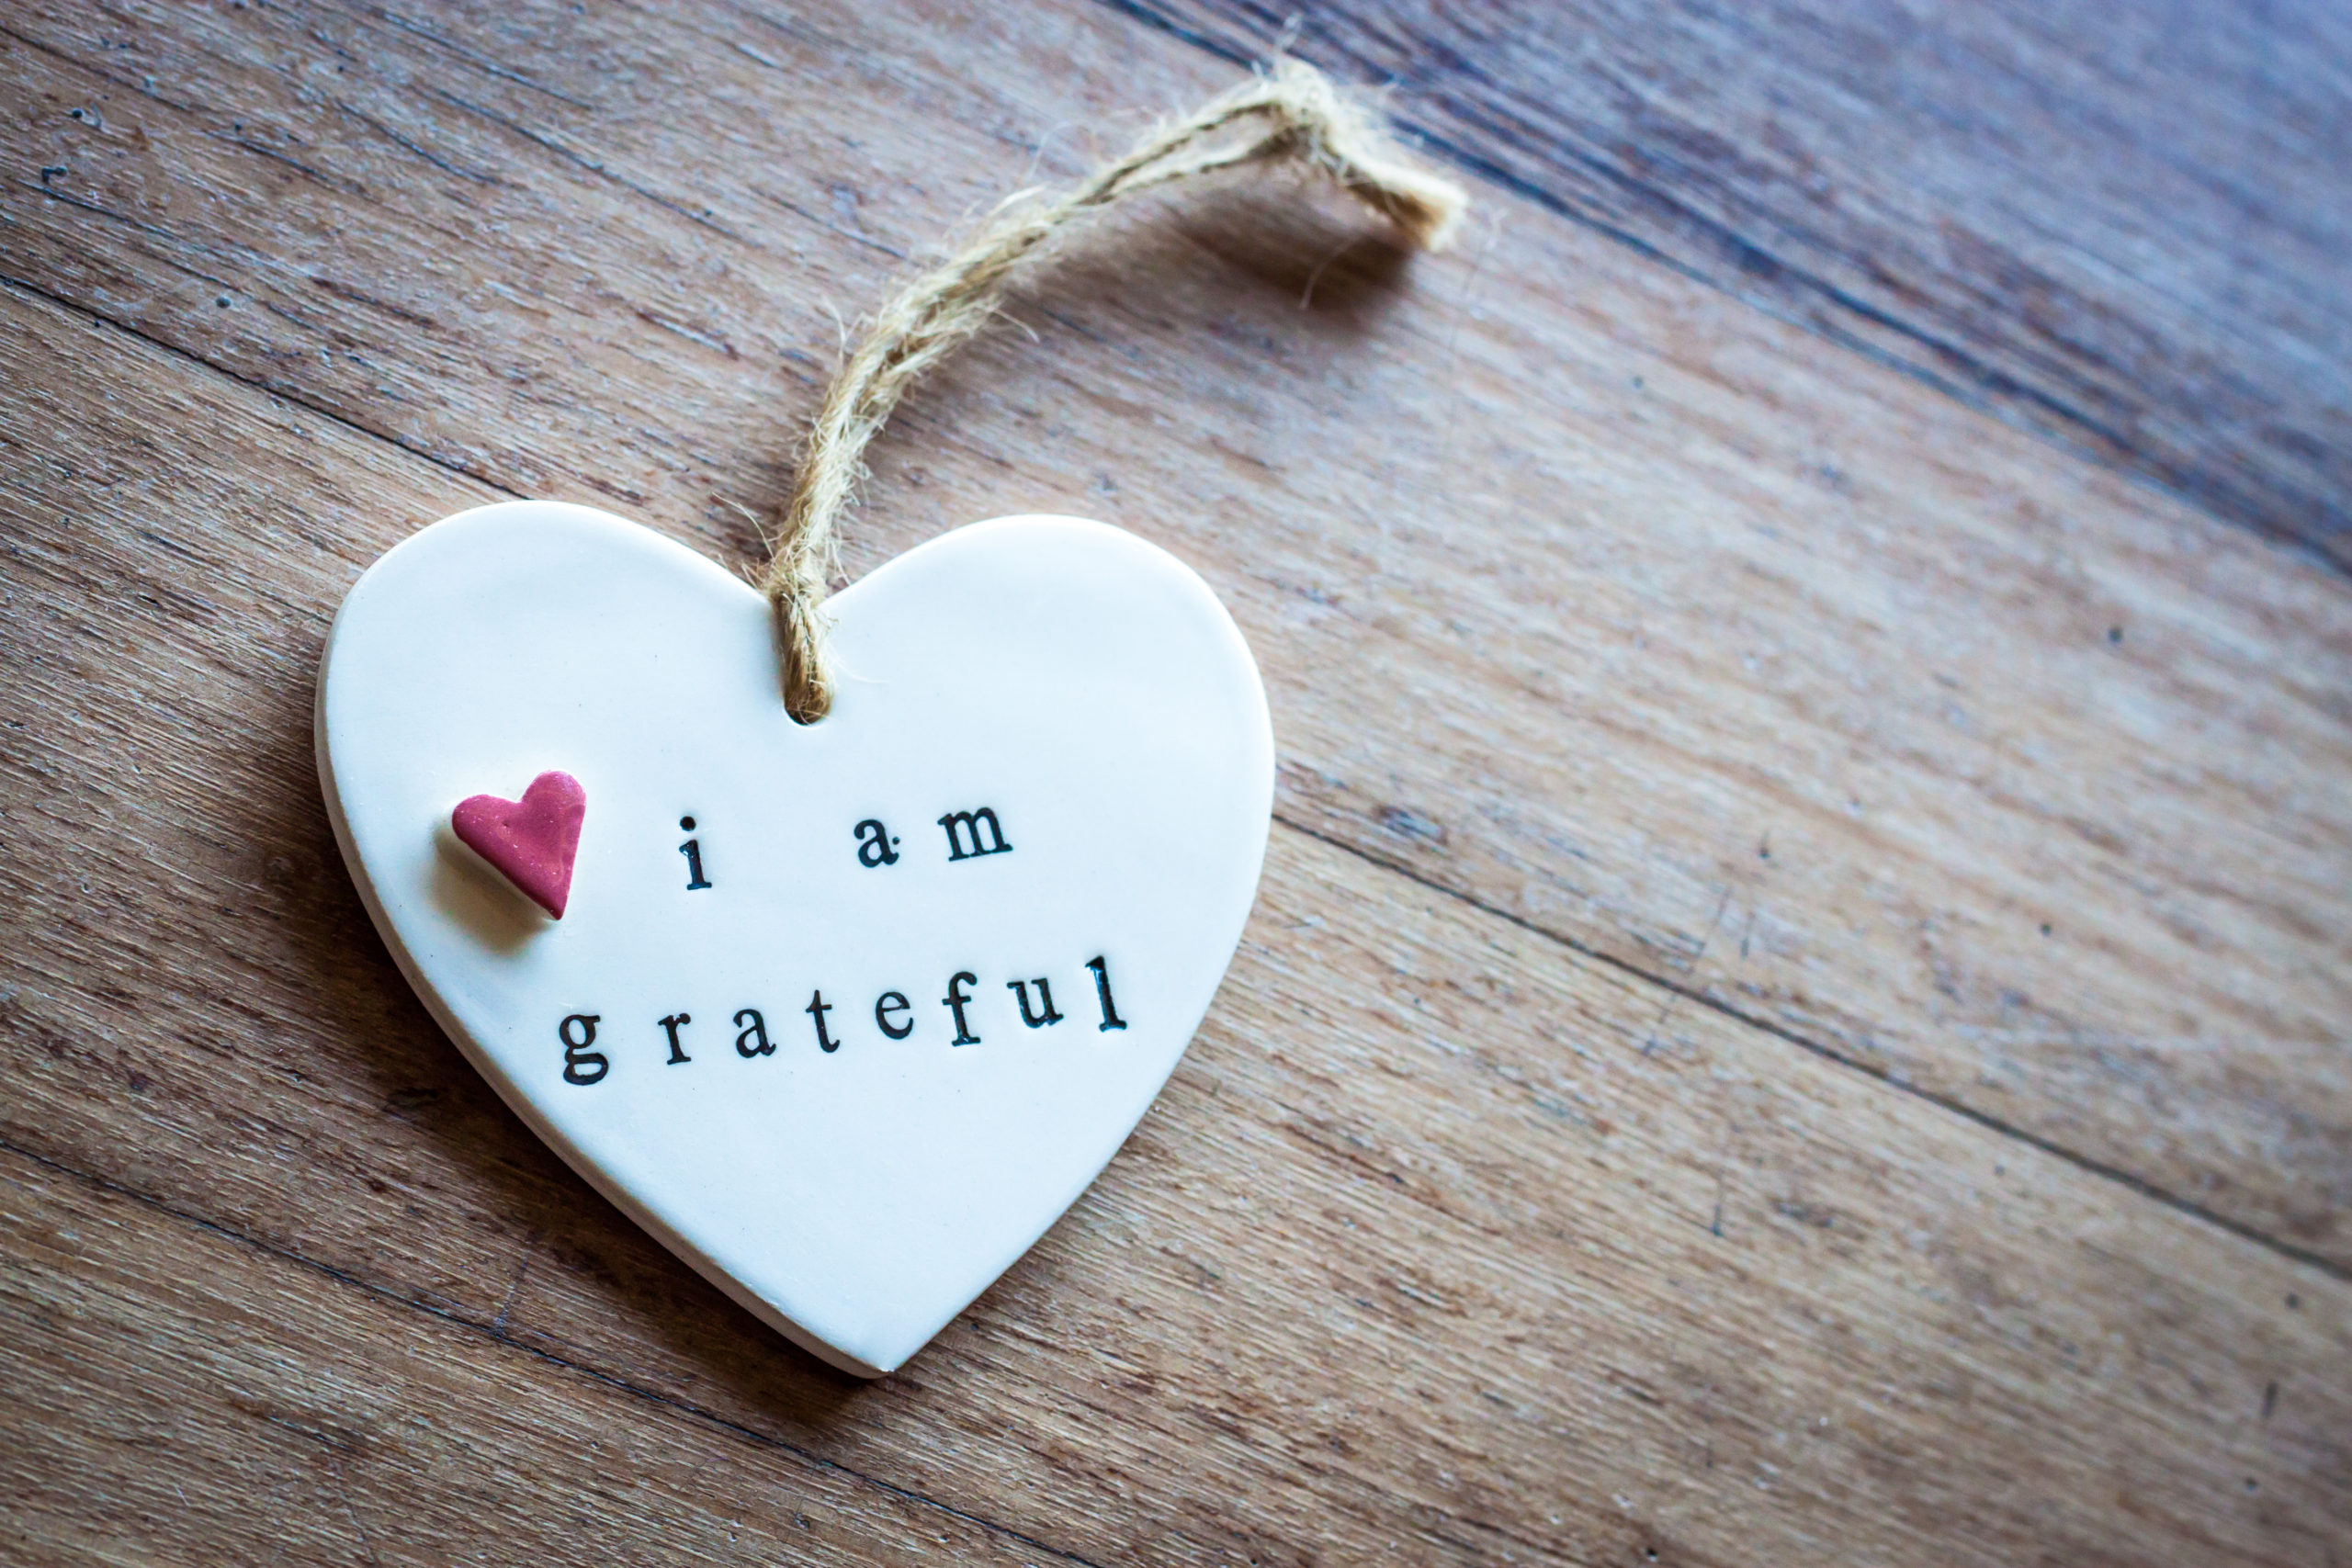 5 Tips For Cultivating Gratitude